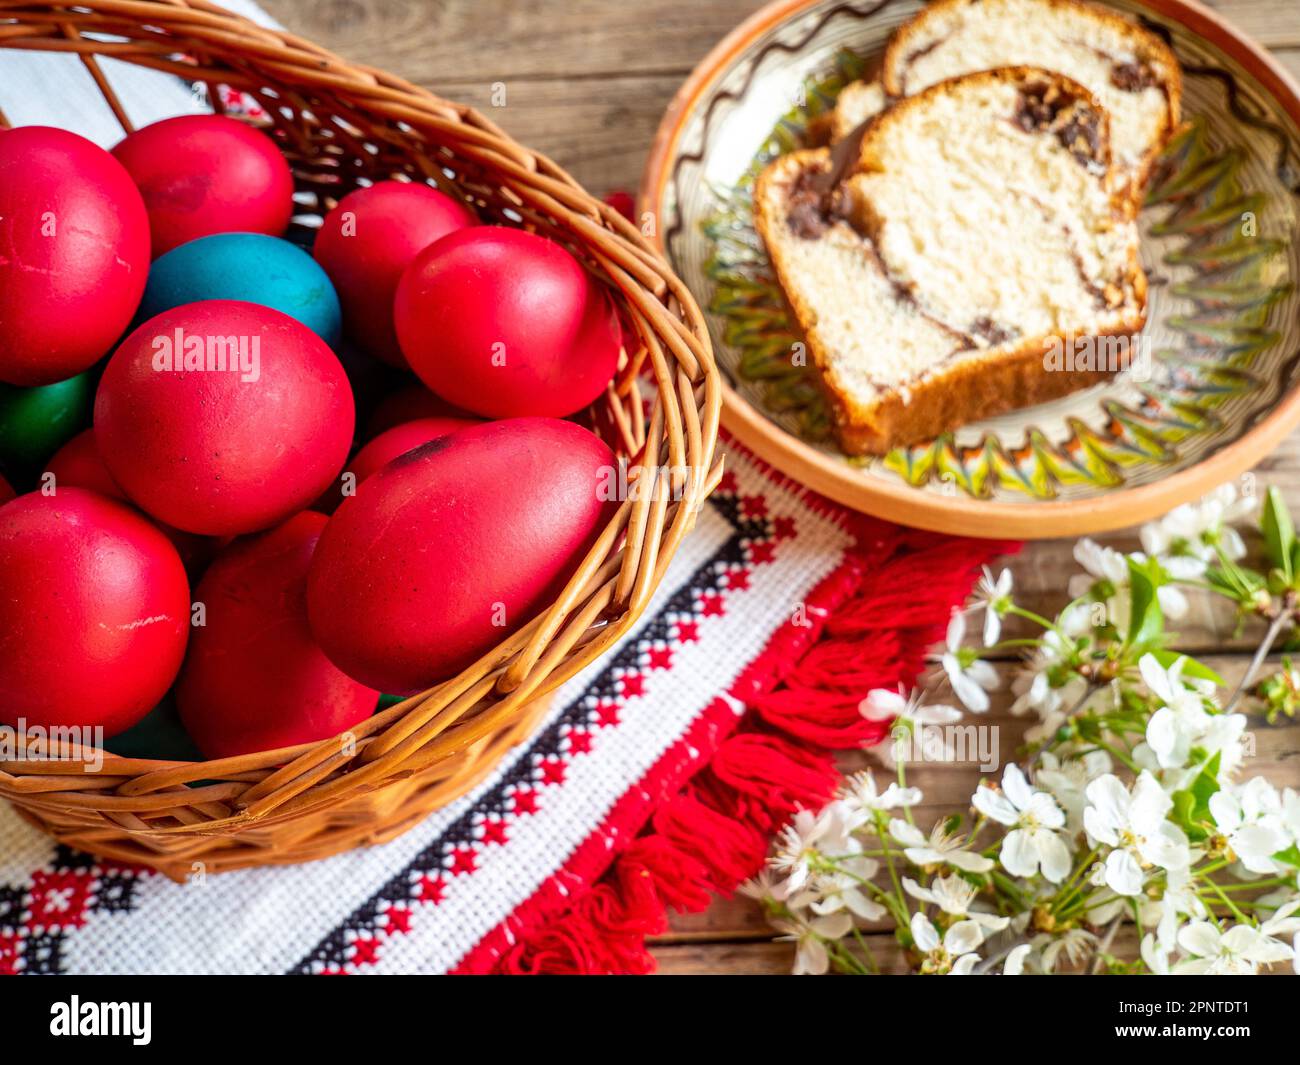 red Easter eggs next to flowering branches and plate with sweet sponge cake or cozonac on wooden table Stock Photo